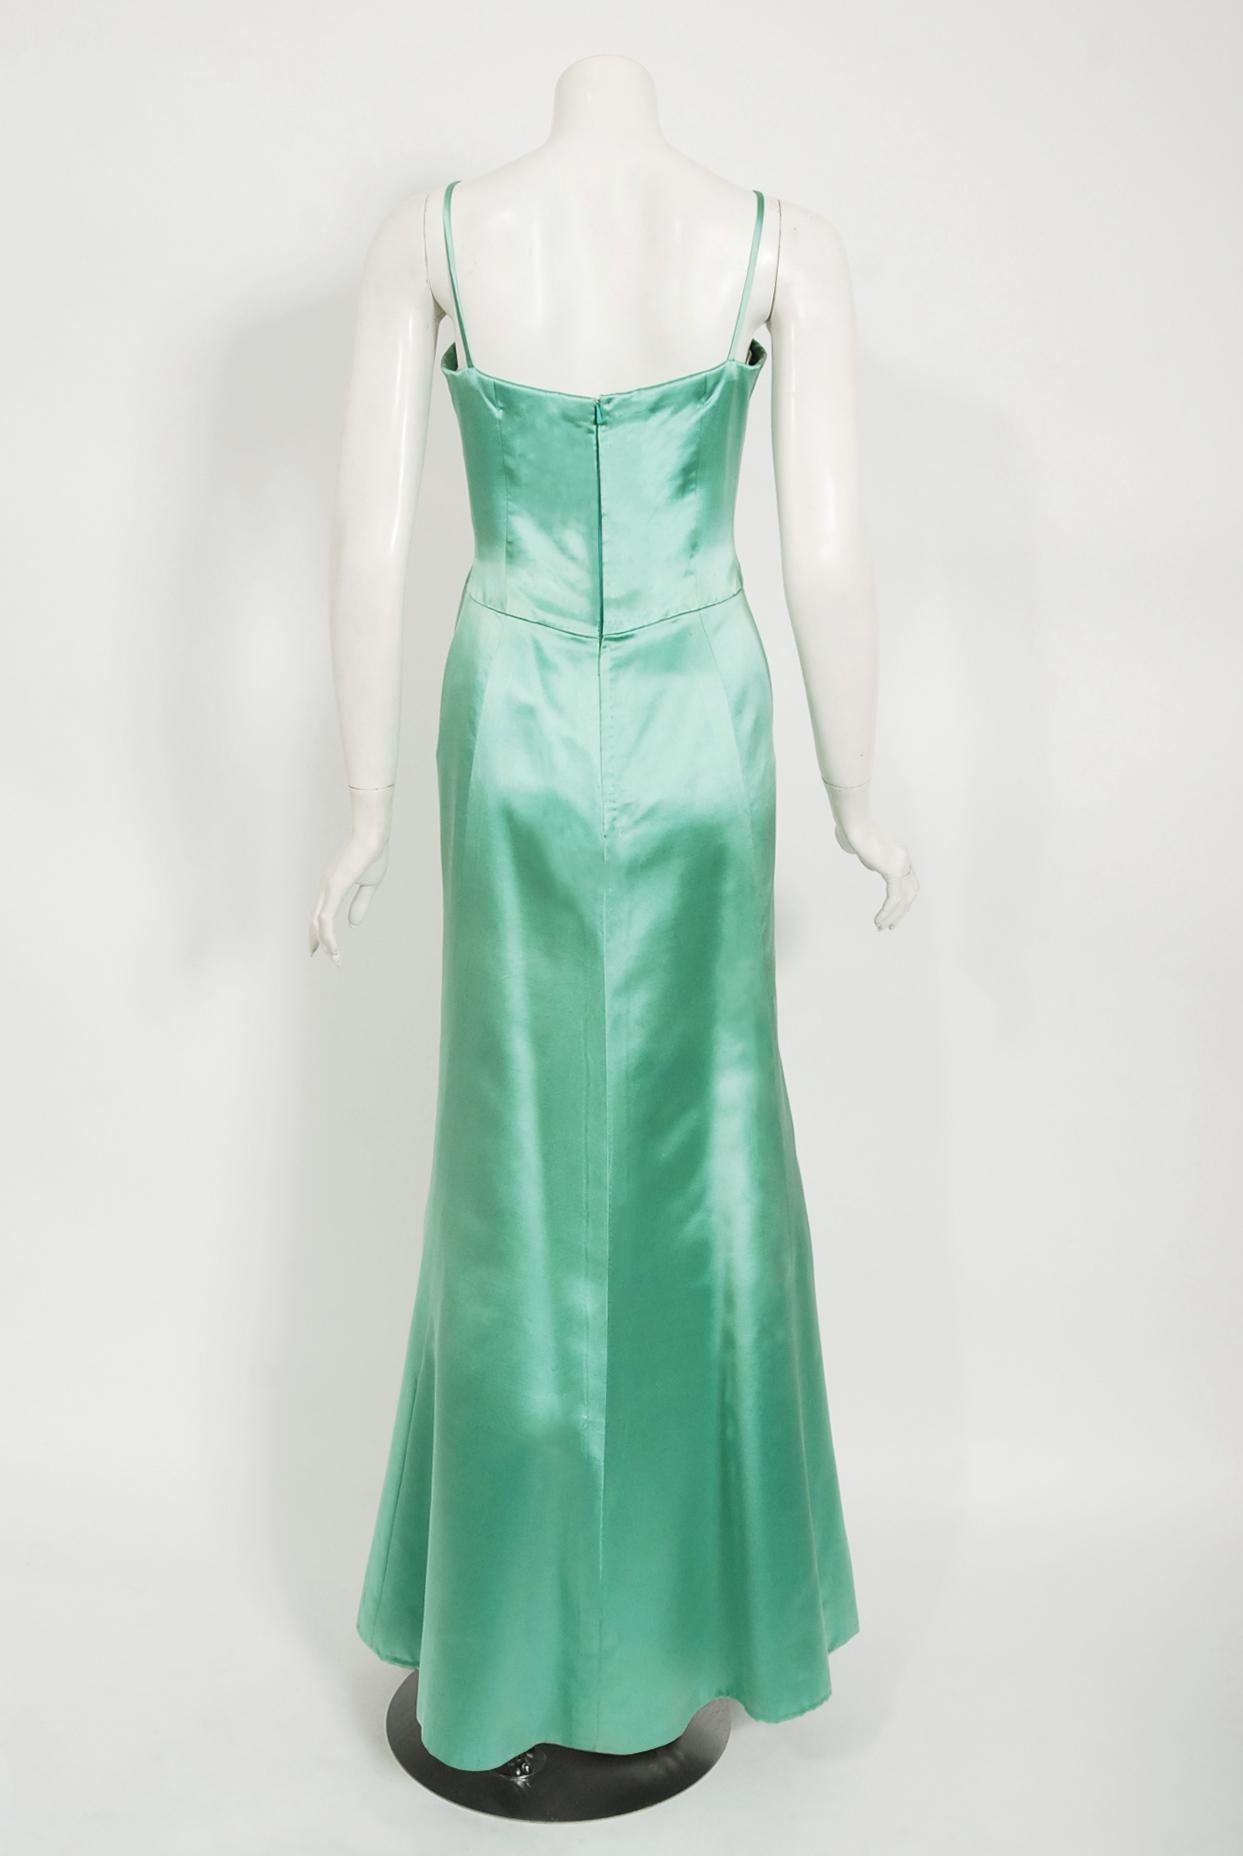 Vintage 1962 Nina Ricci Couture Seafoam Blue Green Beaded Lace Satin Fitted Gown 5